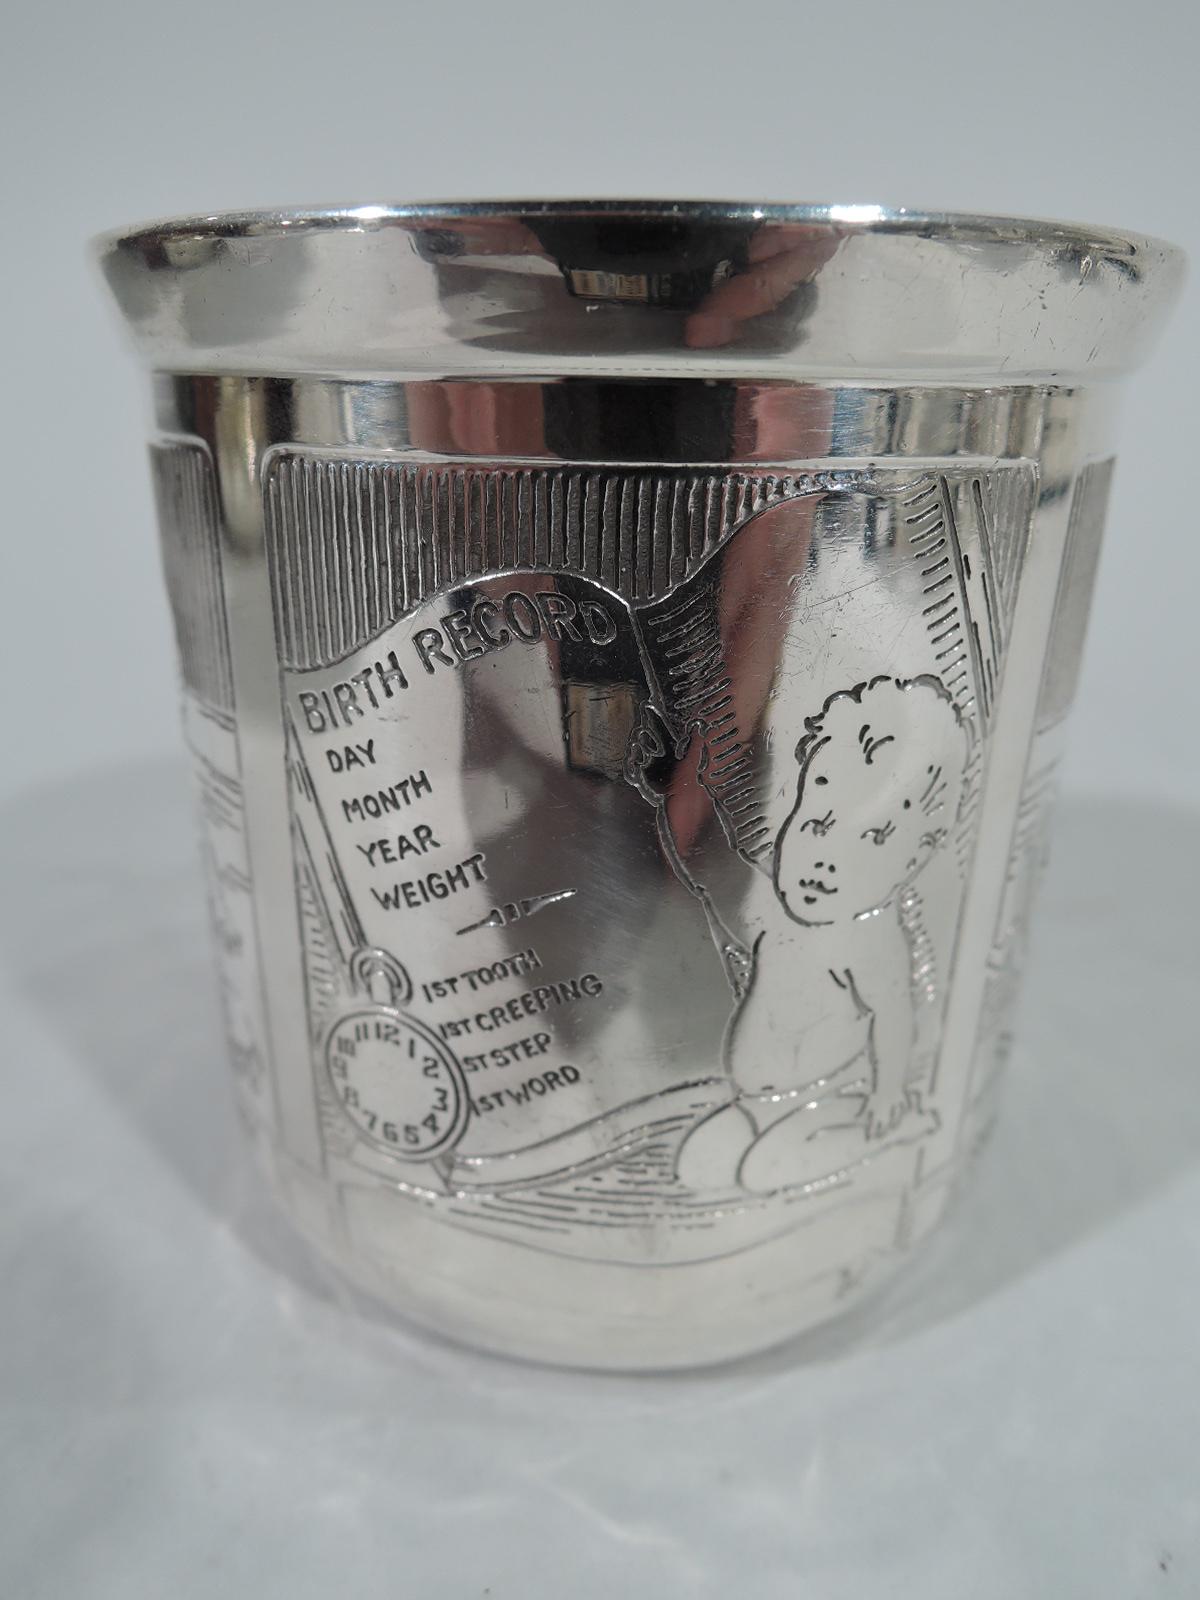 First step sterling silver baby cup. Made by Blackinton in North Attleboro, circa 1920. Straight sides and C-scroll handle. Rectangular frames engraved with sweet fat baby achieving baby firsts: First word, tooth, creeping, and step. Another frame